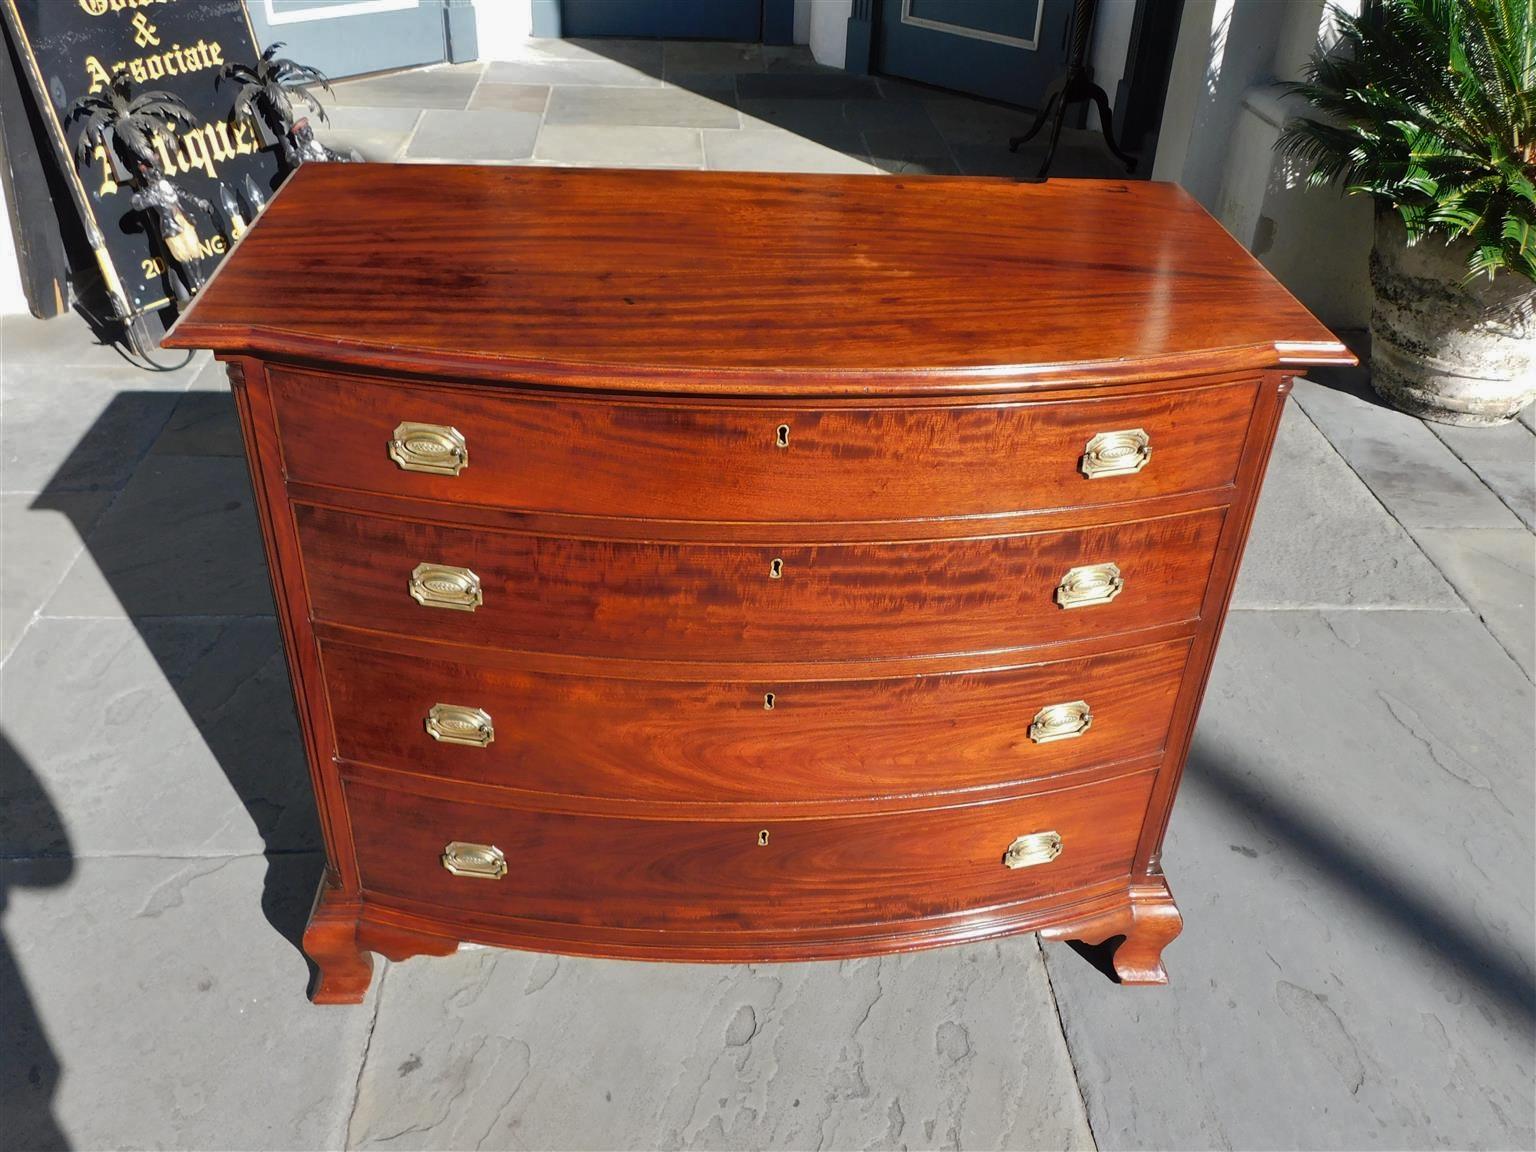 American Mahogany bow front chest with a carved molded edge top, four graduated drawers with the original brasses and escutcheons, flanking fluted quarter columns, and resting on the original ogee bracket feet, Mid-19th century
Secondary wood